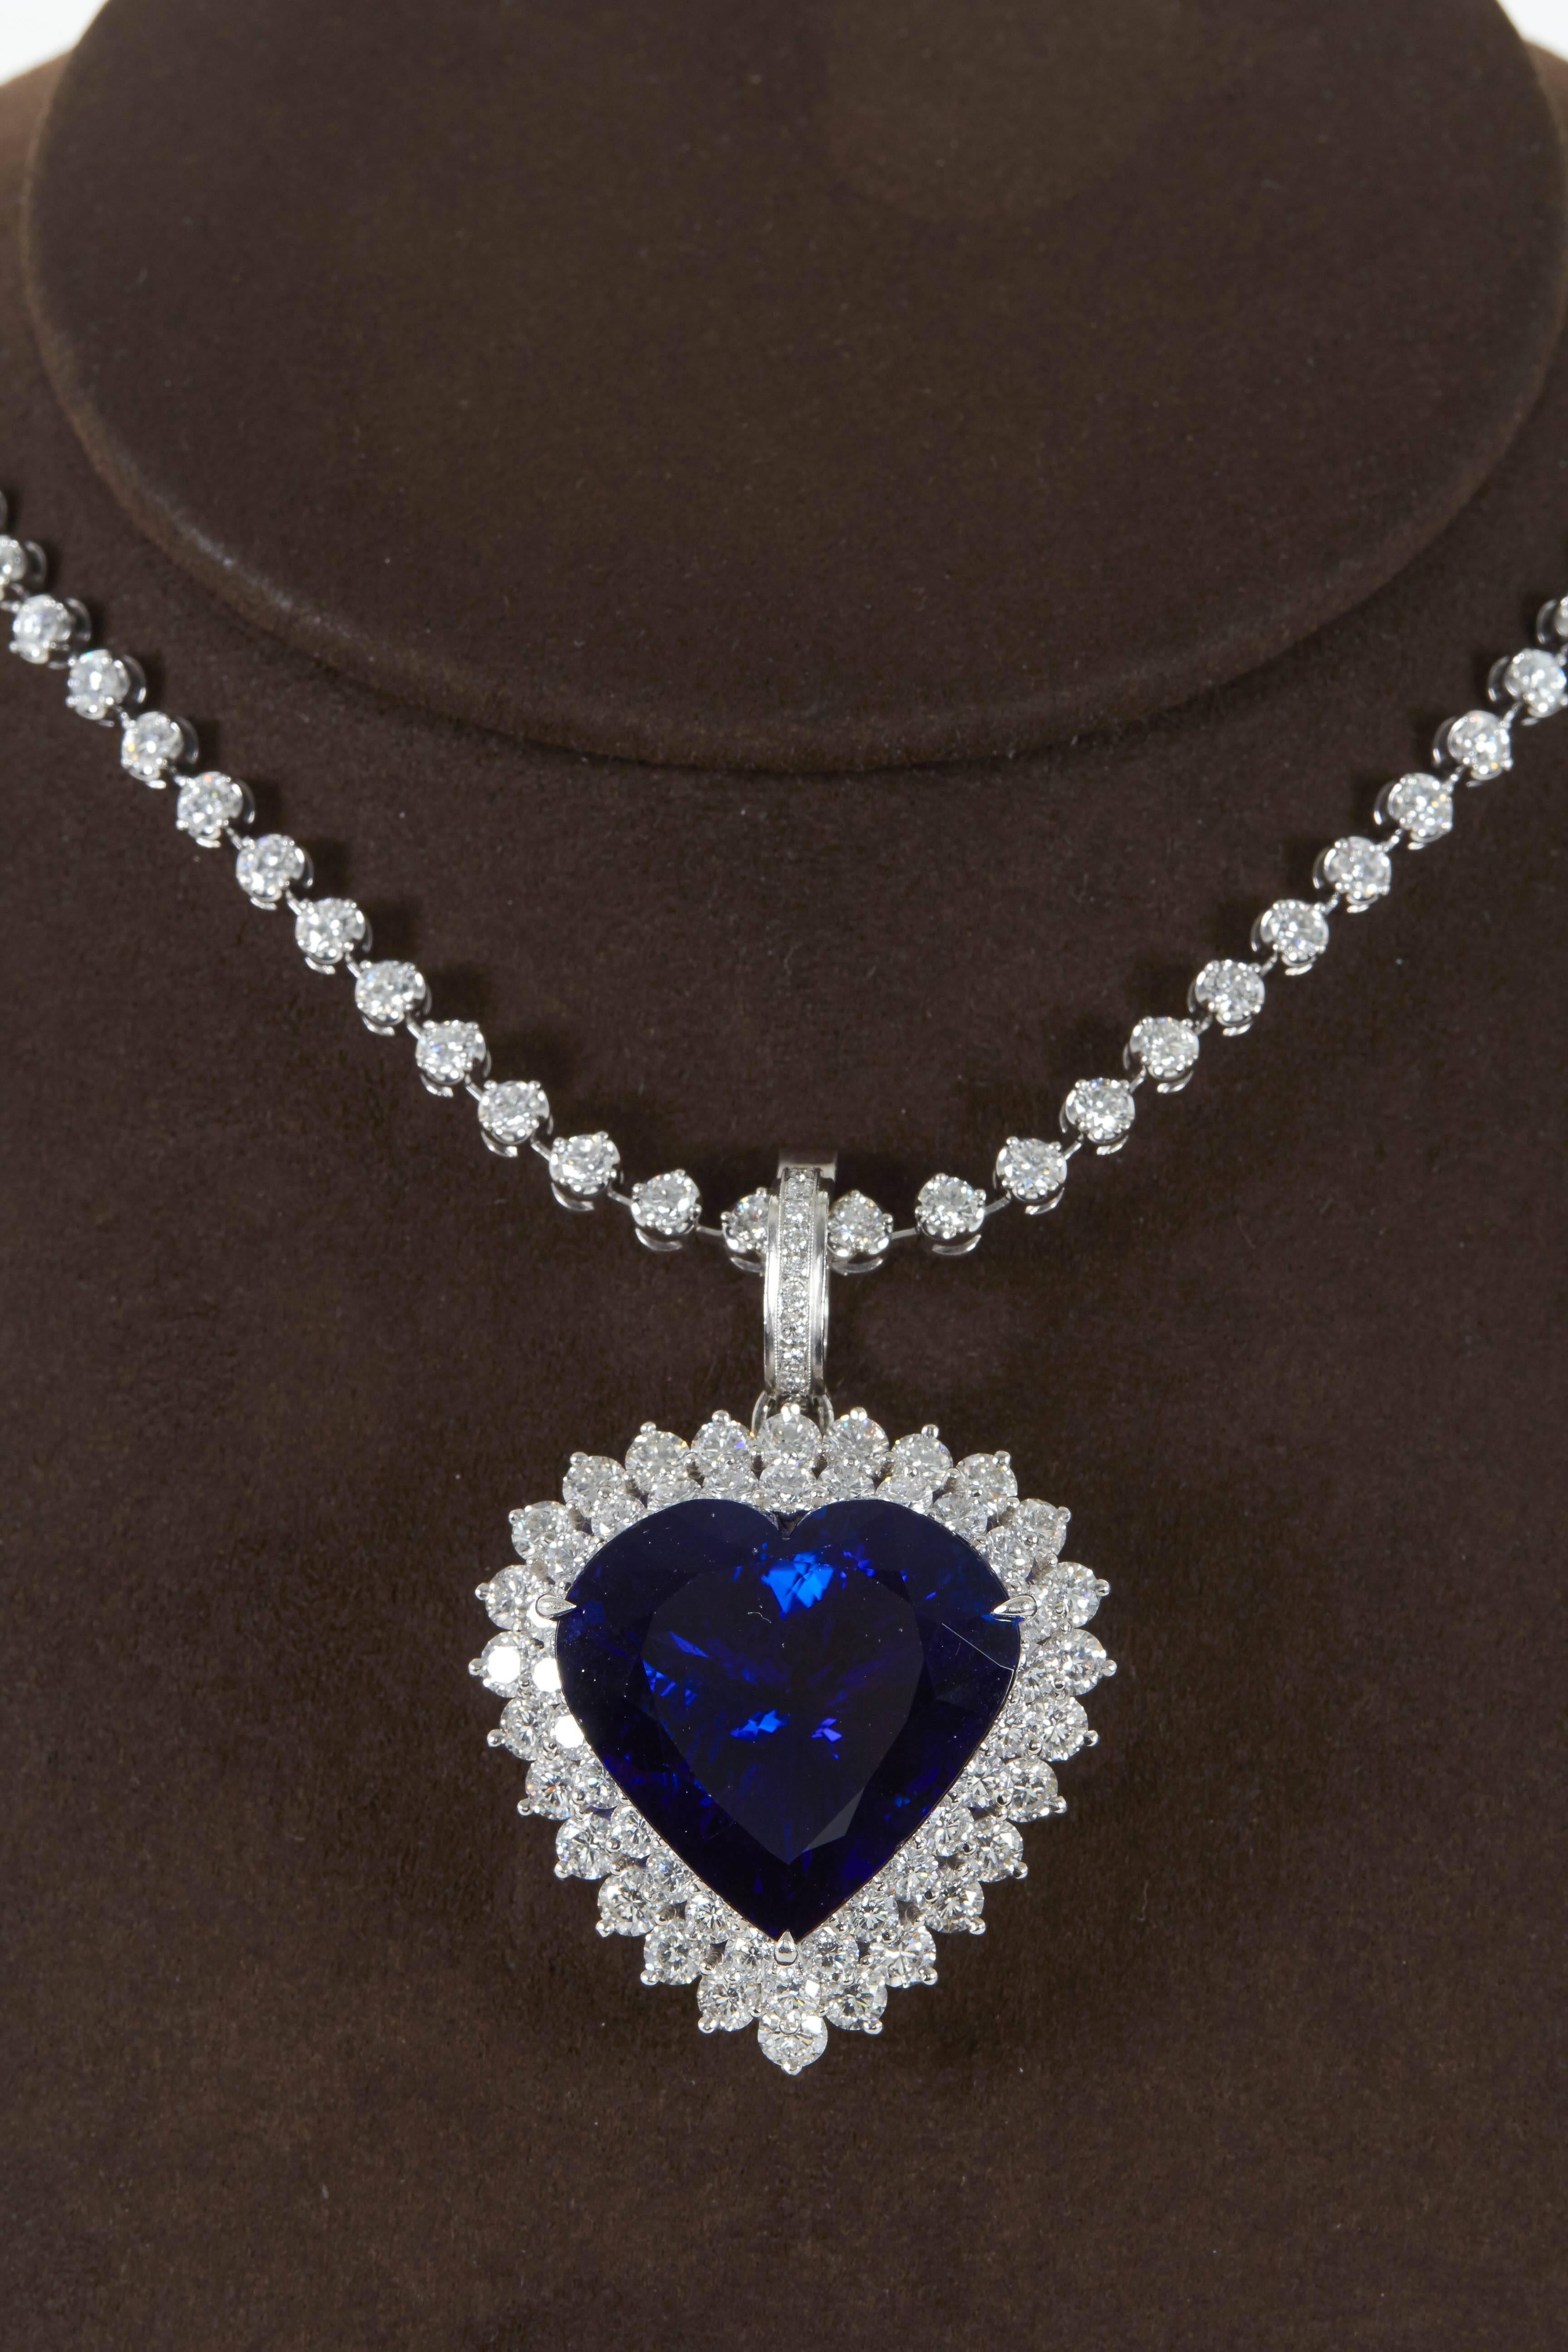 A collectors piece!

49.27 brilliant heart shaped Tanzanite, full of life with blue and purple hues. 
9.20 carats of round brilliant cut F/G color VS clarity diamonds surround the heart shaped Tanzanite.

This important pendant hangs from an